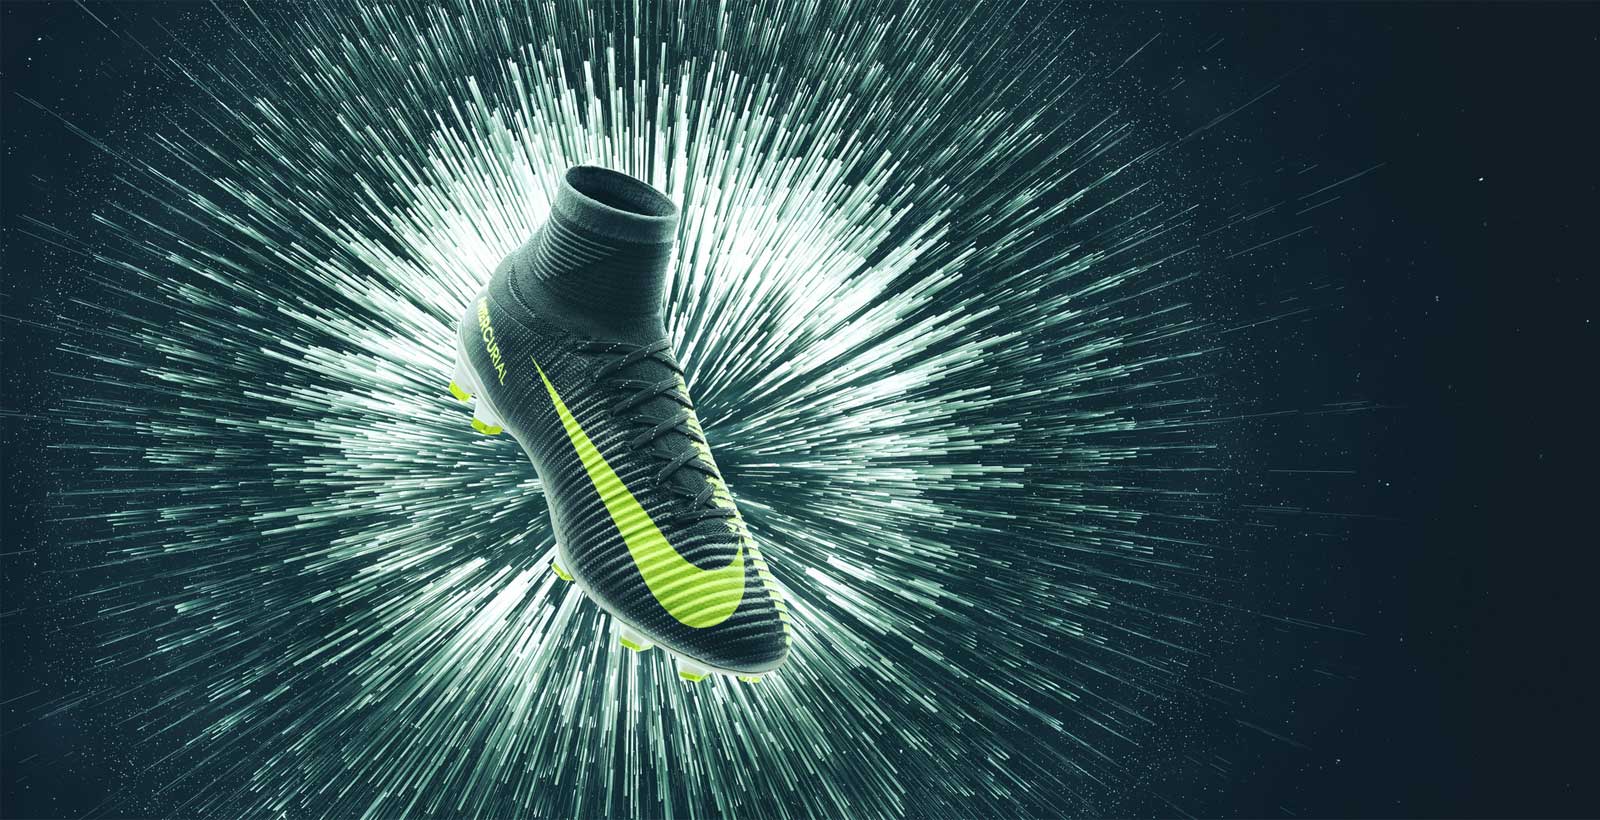 Nike Mercurial Superfly Cristiano Ronaldo 3 Discovery Boots Released - Footy Headlines